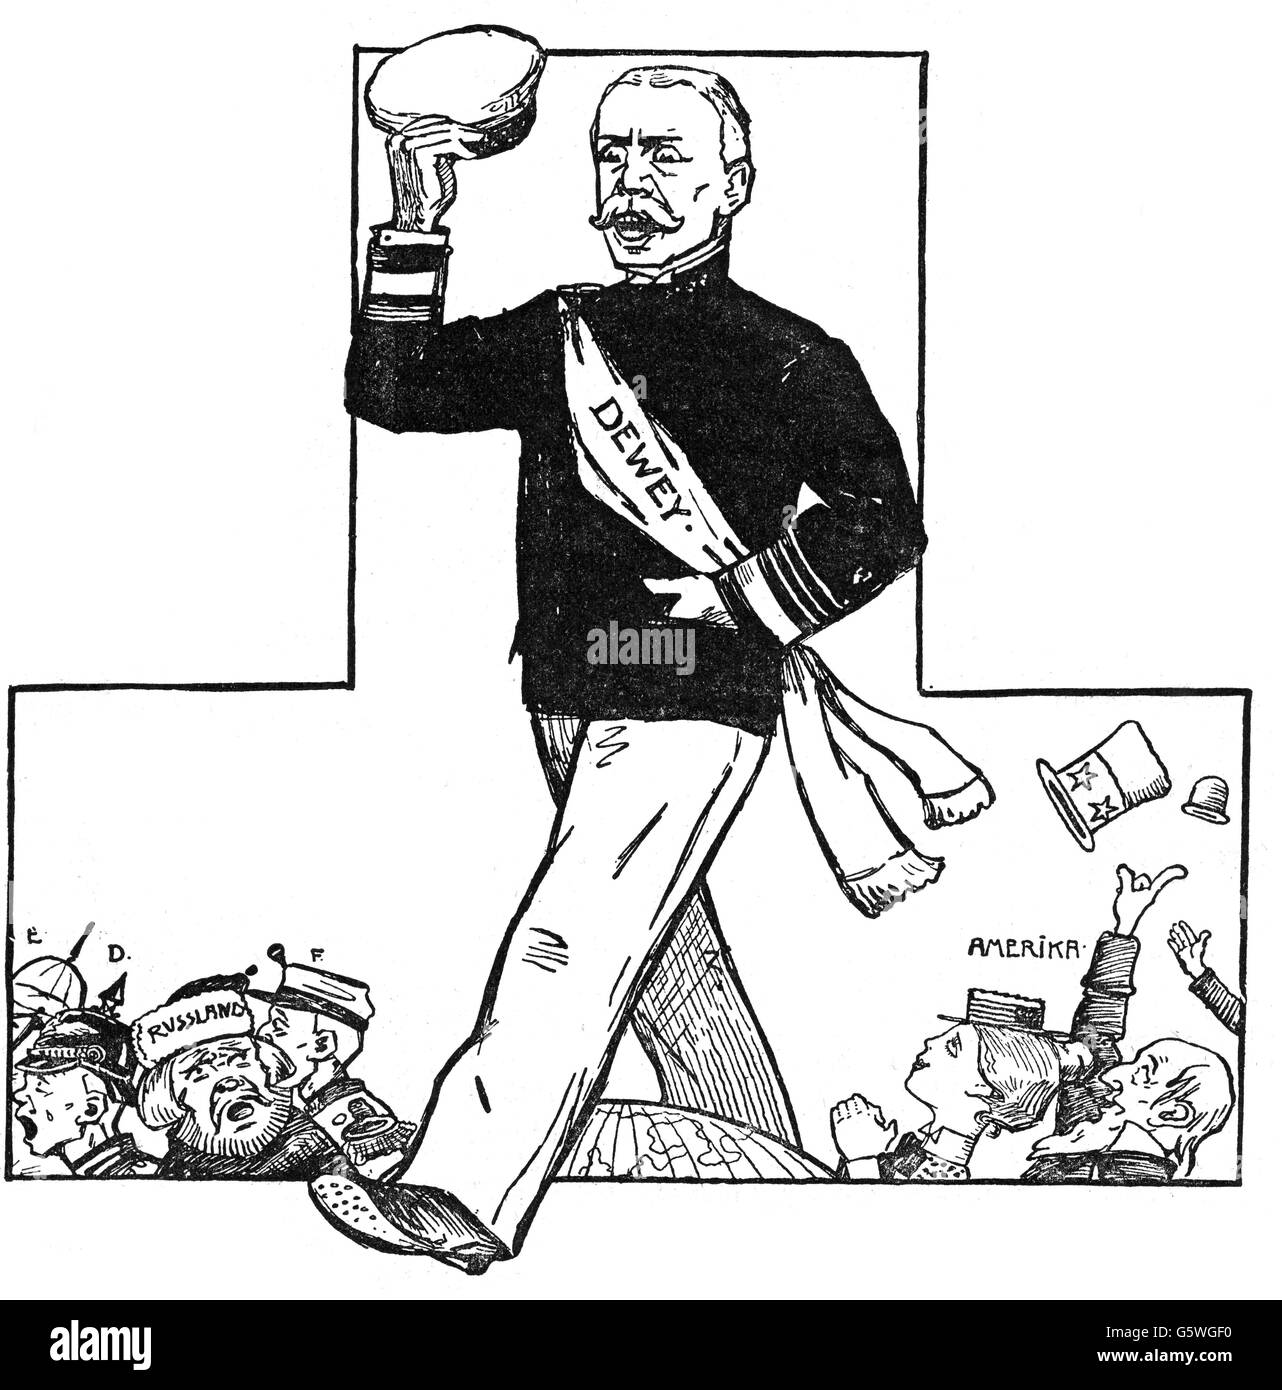 Spanish-American War 1898, caricature, admiral George Dewey, 'The coming Great Man', drawing, 'Die Woche', Berlin, 1898, Additional-Rights-Clearences-Not Available Stock Photo